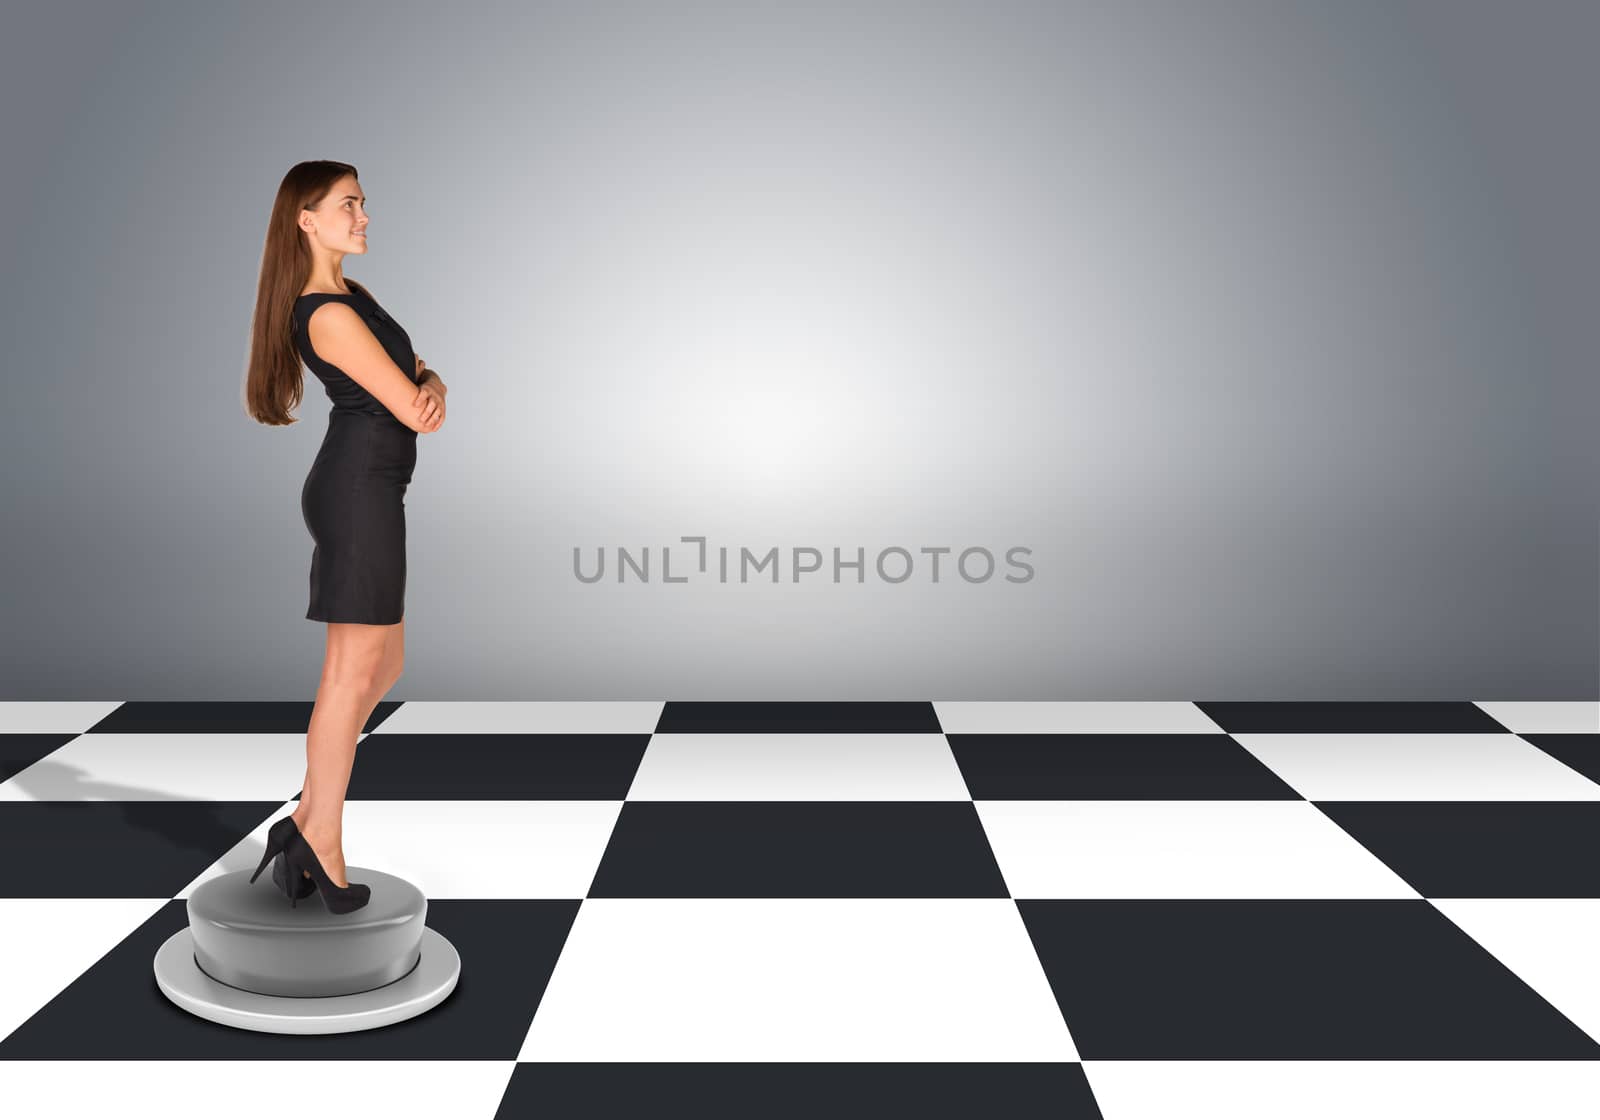 Beautiful businesswoman standing with crossed arms. Floor with checkerboard texture and gray wall